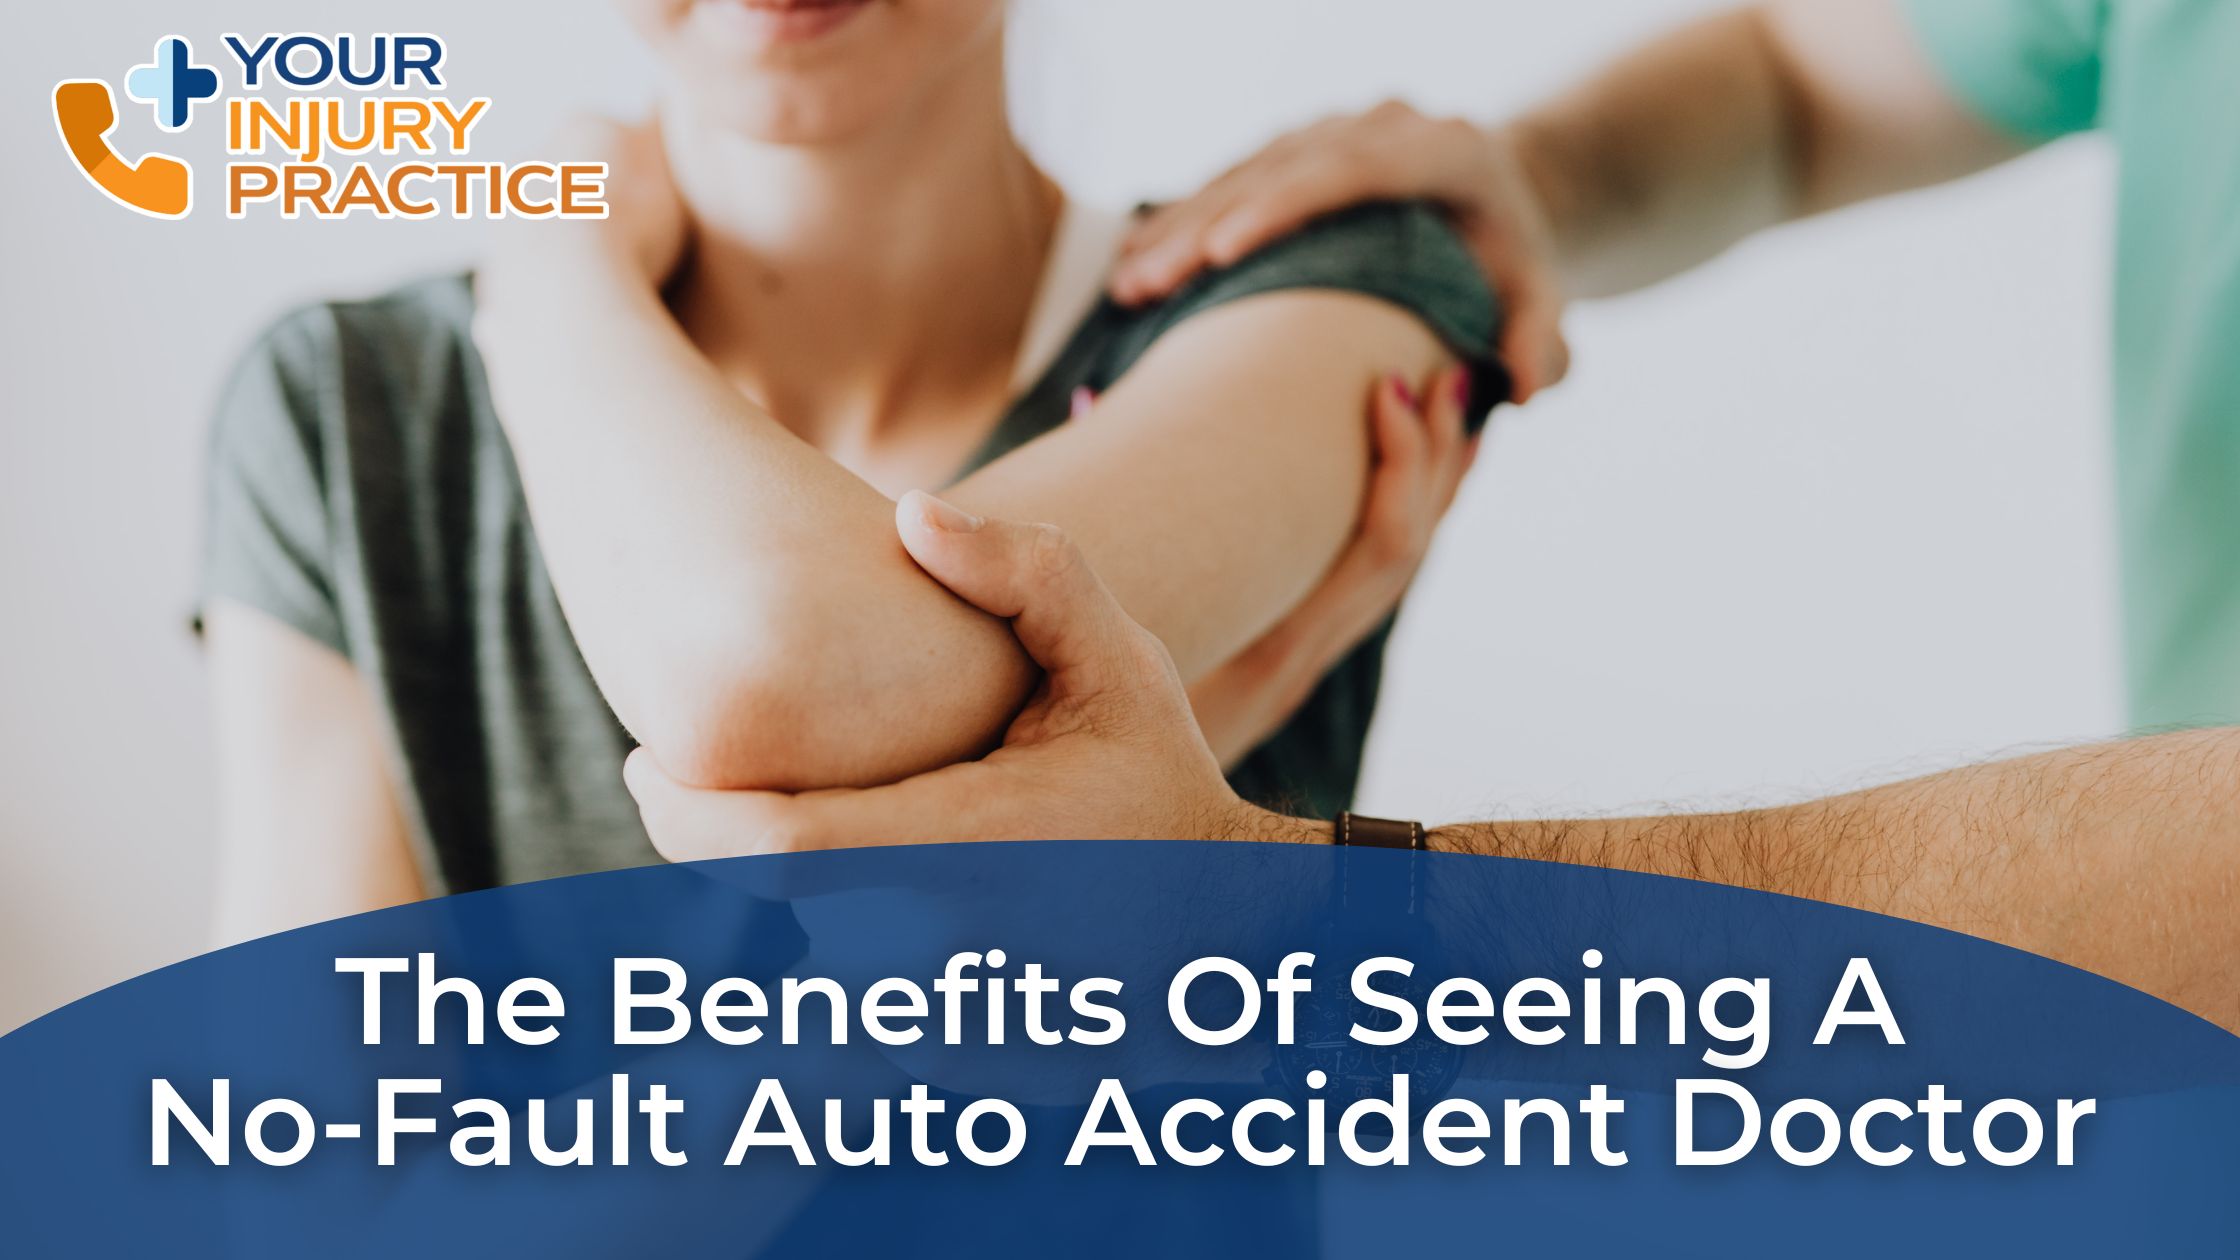 The Benefits of Seeing a No-Fault Auto Accident Doctor